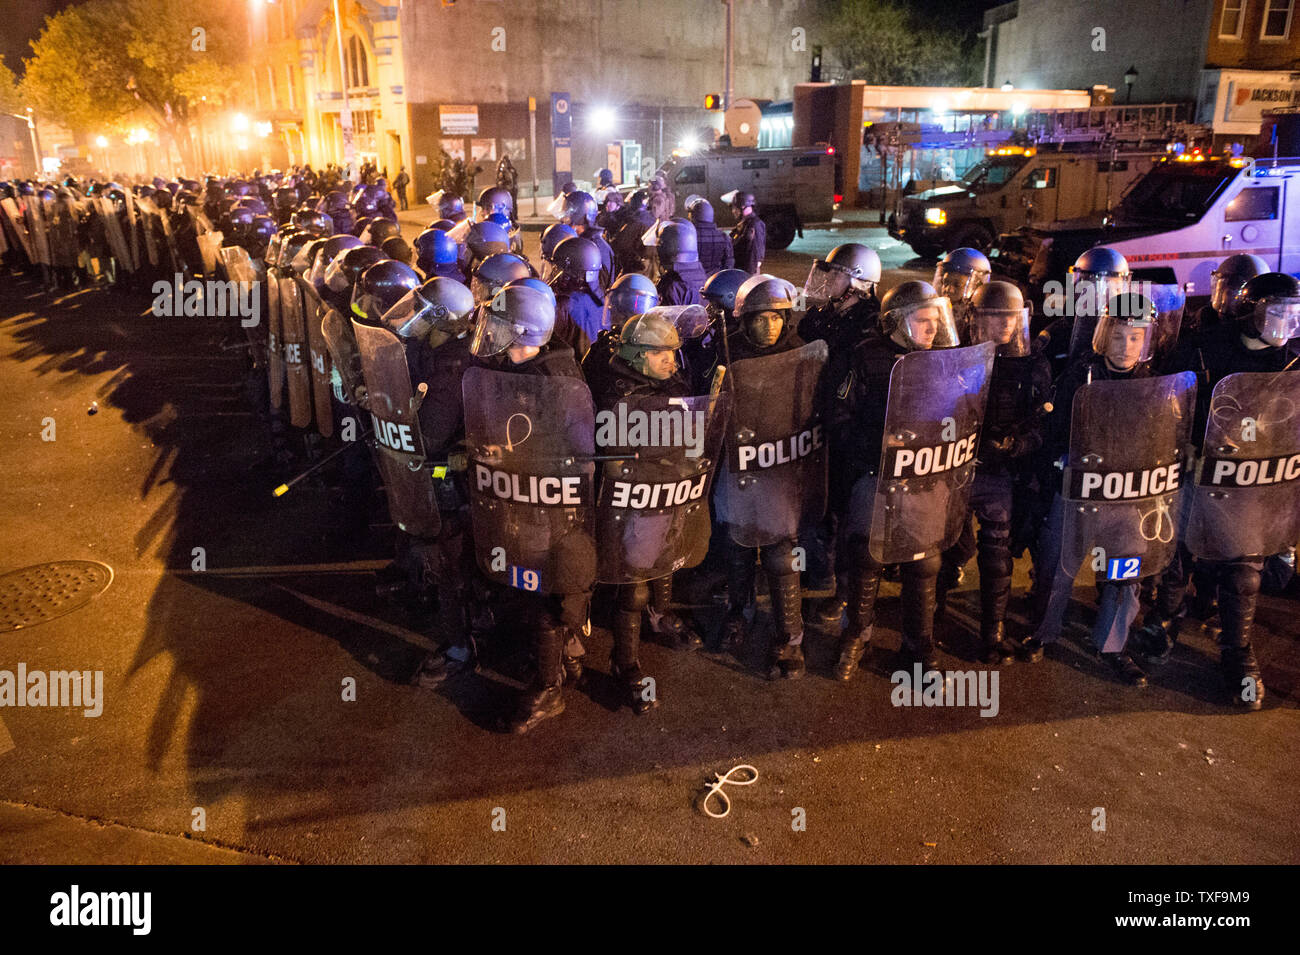 Police at the corner of Pennsylvania Ave and North Ave in Baltimore get ready as the 10 p.m. curfew approaches in Baltimore, Maryland  on April 28, 2015.  Protests have erupted after death of Freddie Gray.    Photo by Ken Cedeno/UPI. Stock Photo